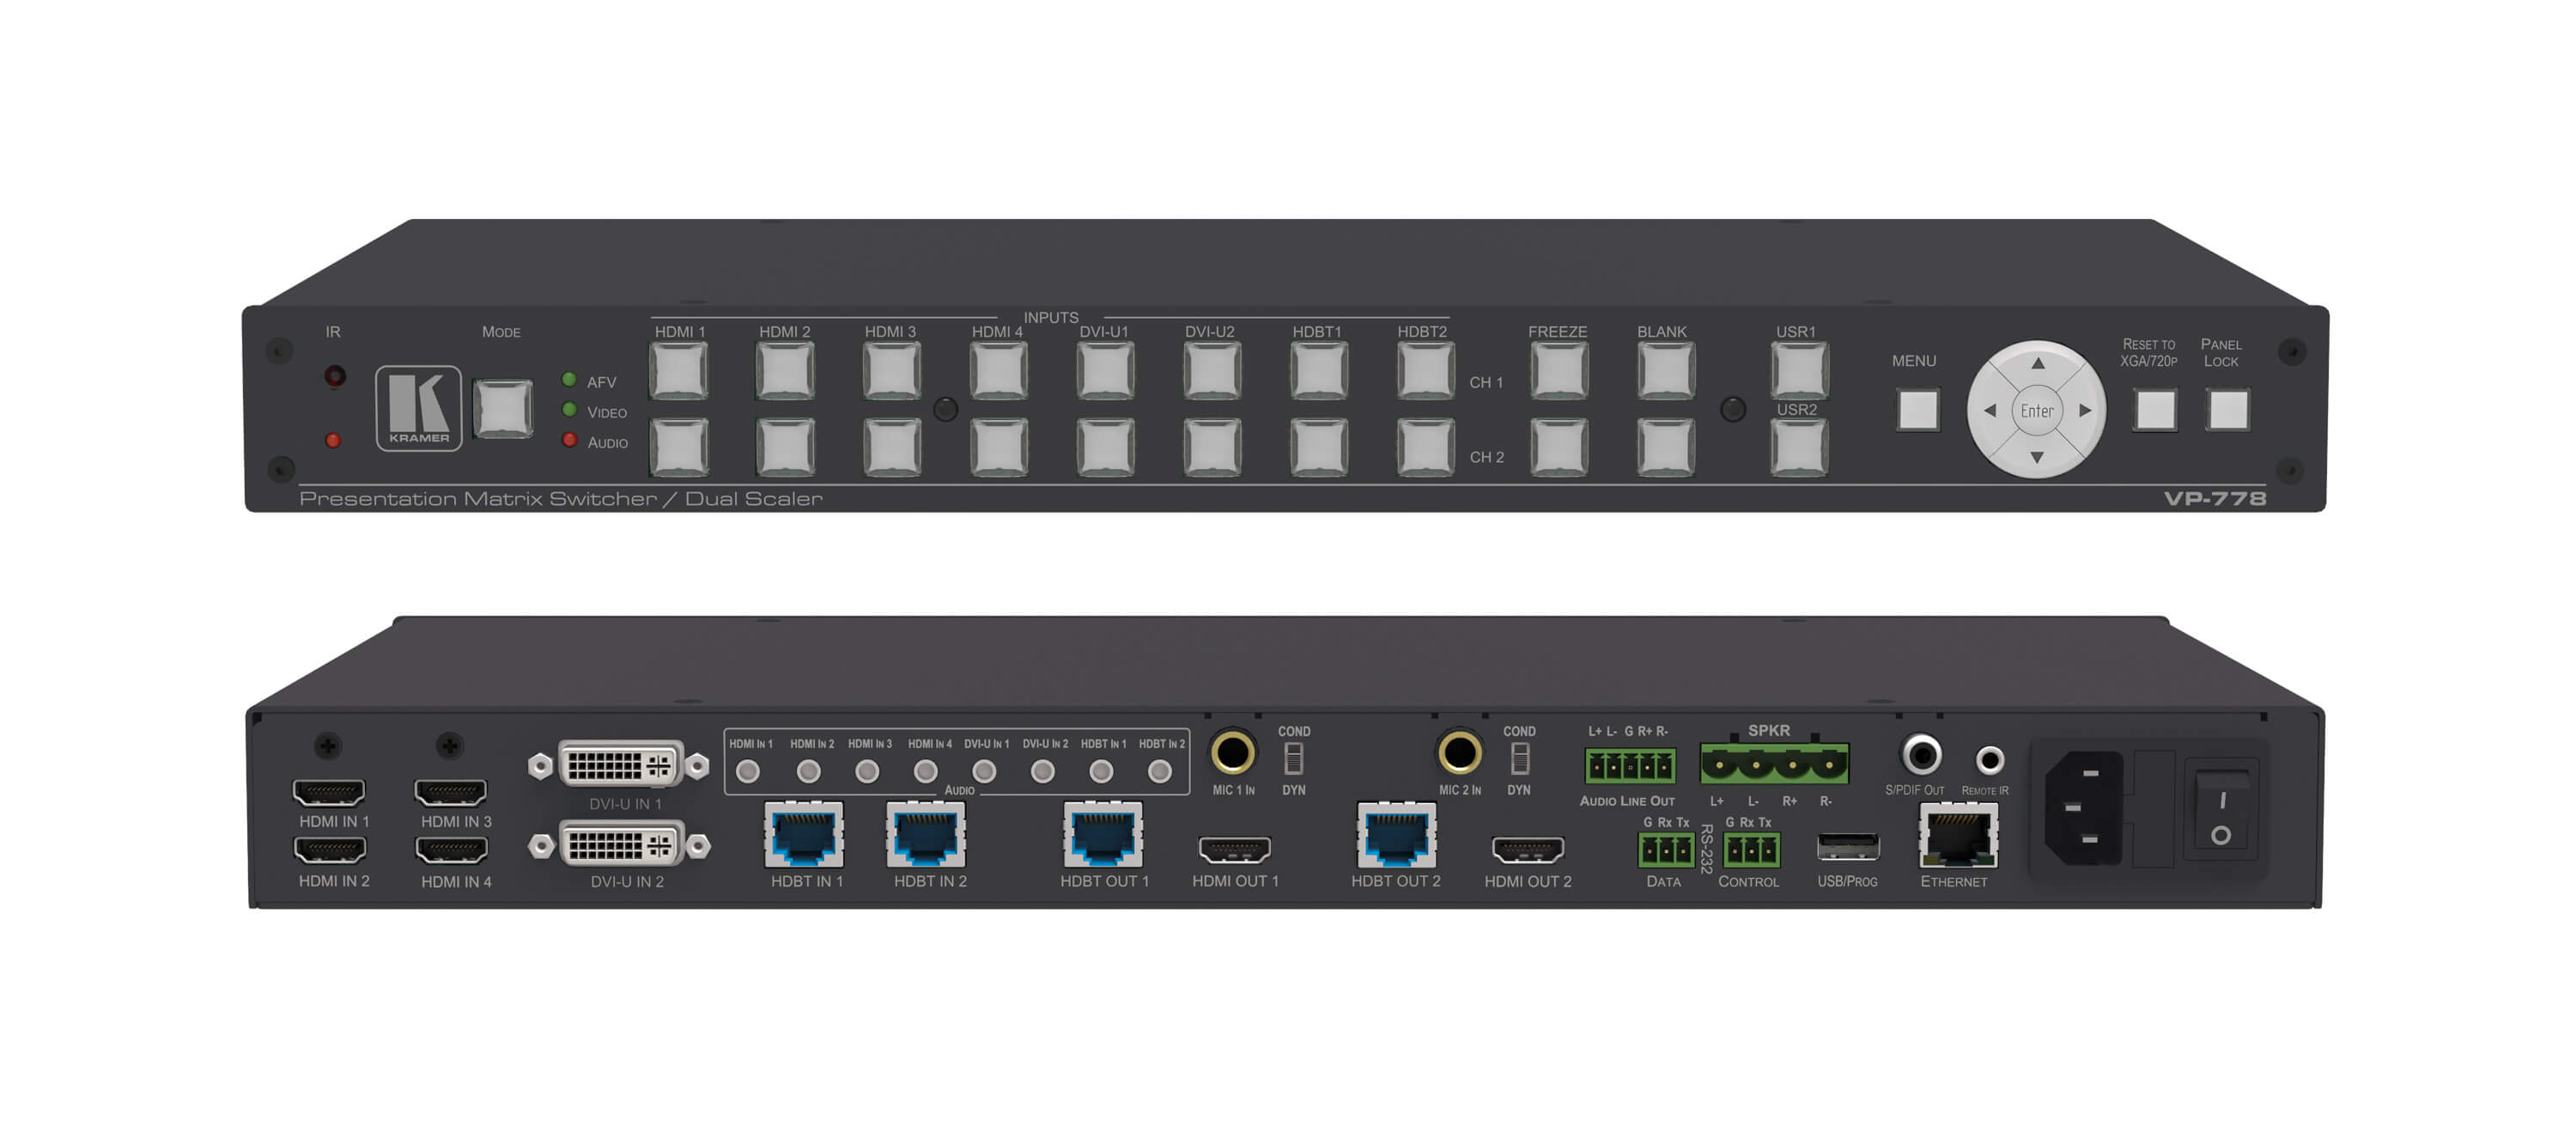 VP-778 8-Input ProScale Presentation Matrix Switch/Dual Scaler with Seamless Video Cuts/4K30 UHD Output Support by Kramer